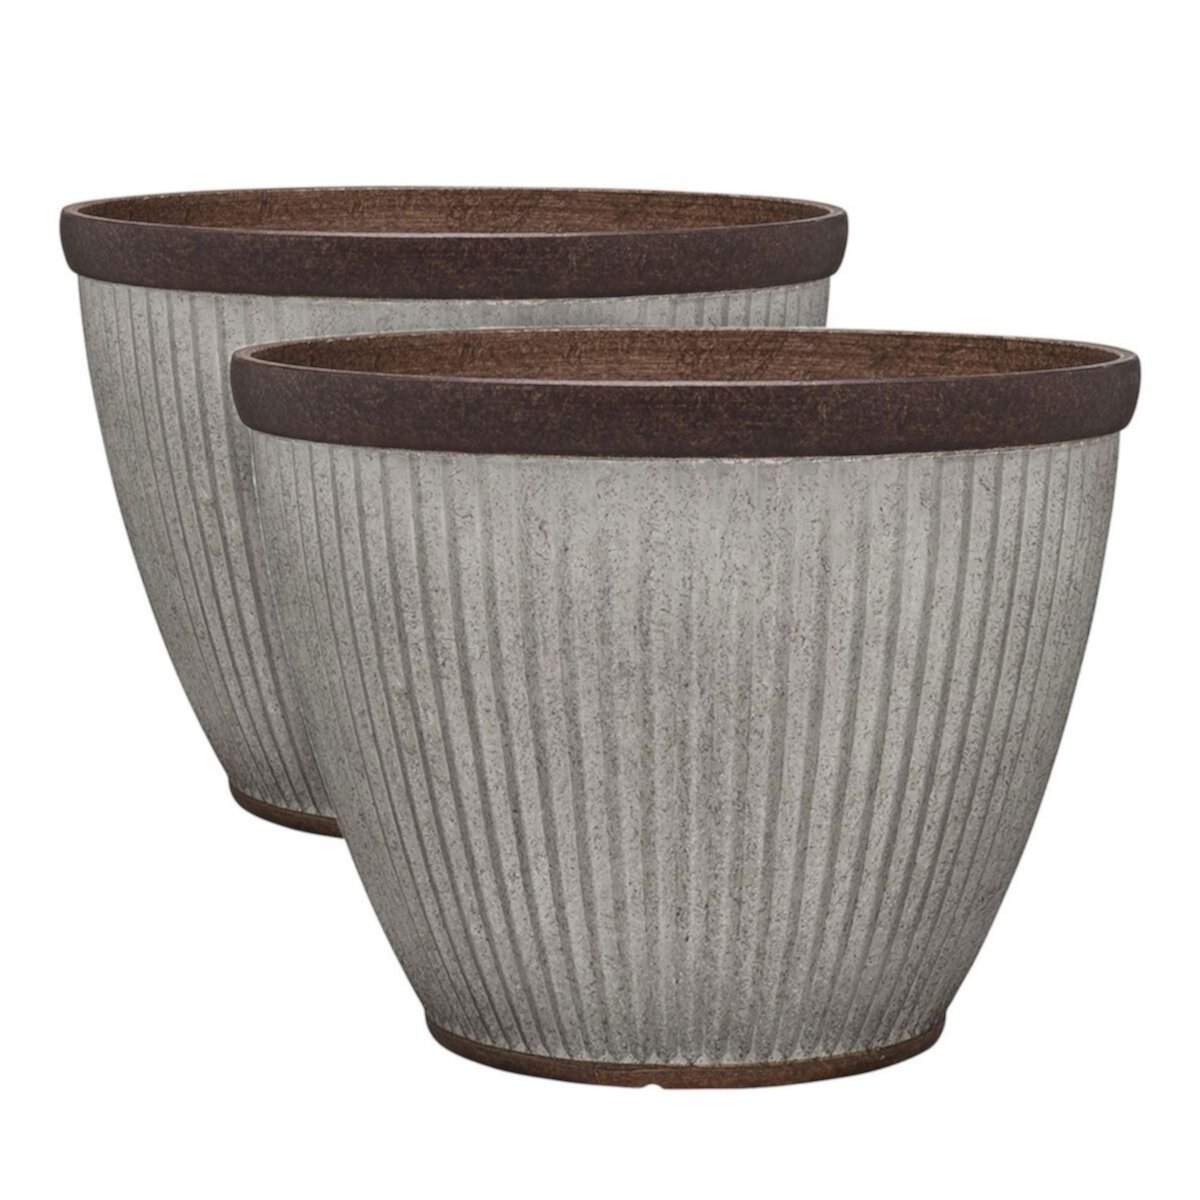 Southern Patio HDR-046868 20.5 Inch Rustic Resin Outdoor Planter Urn (2 Pack) Southern Patio